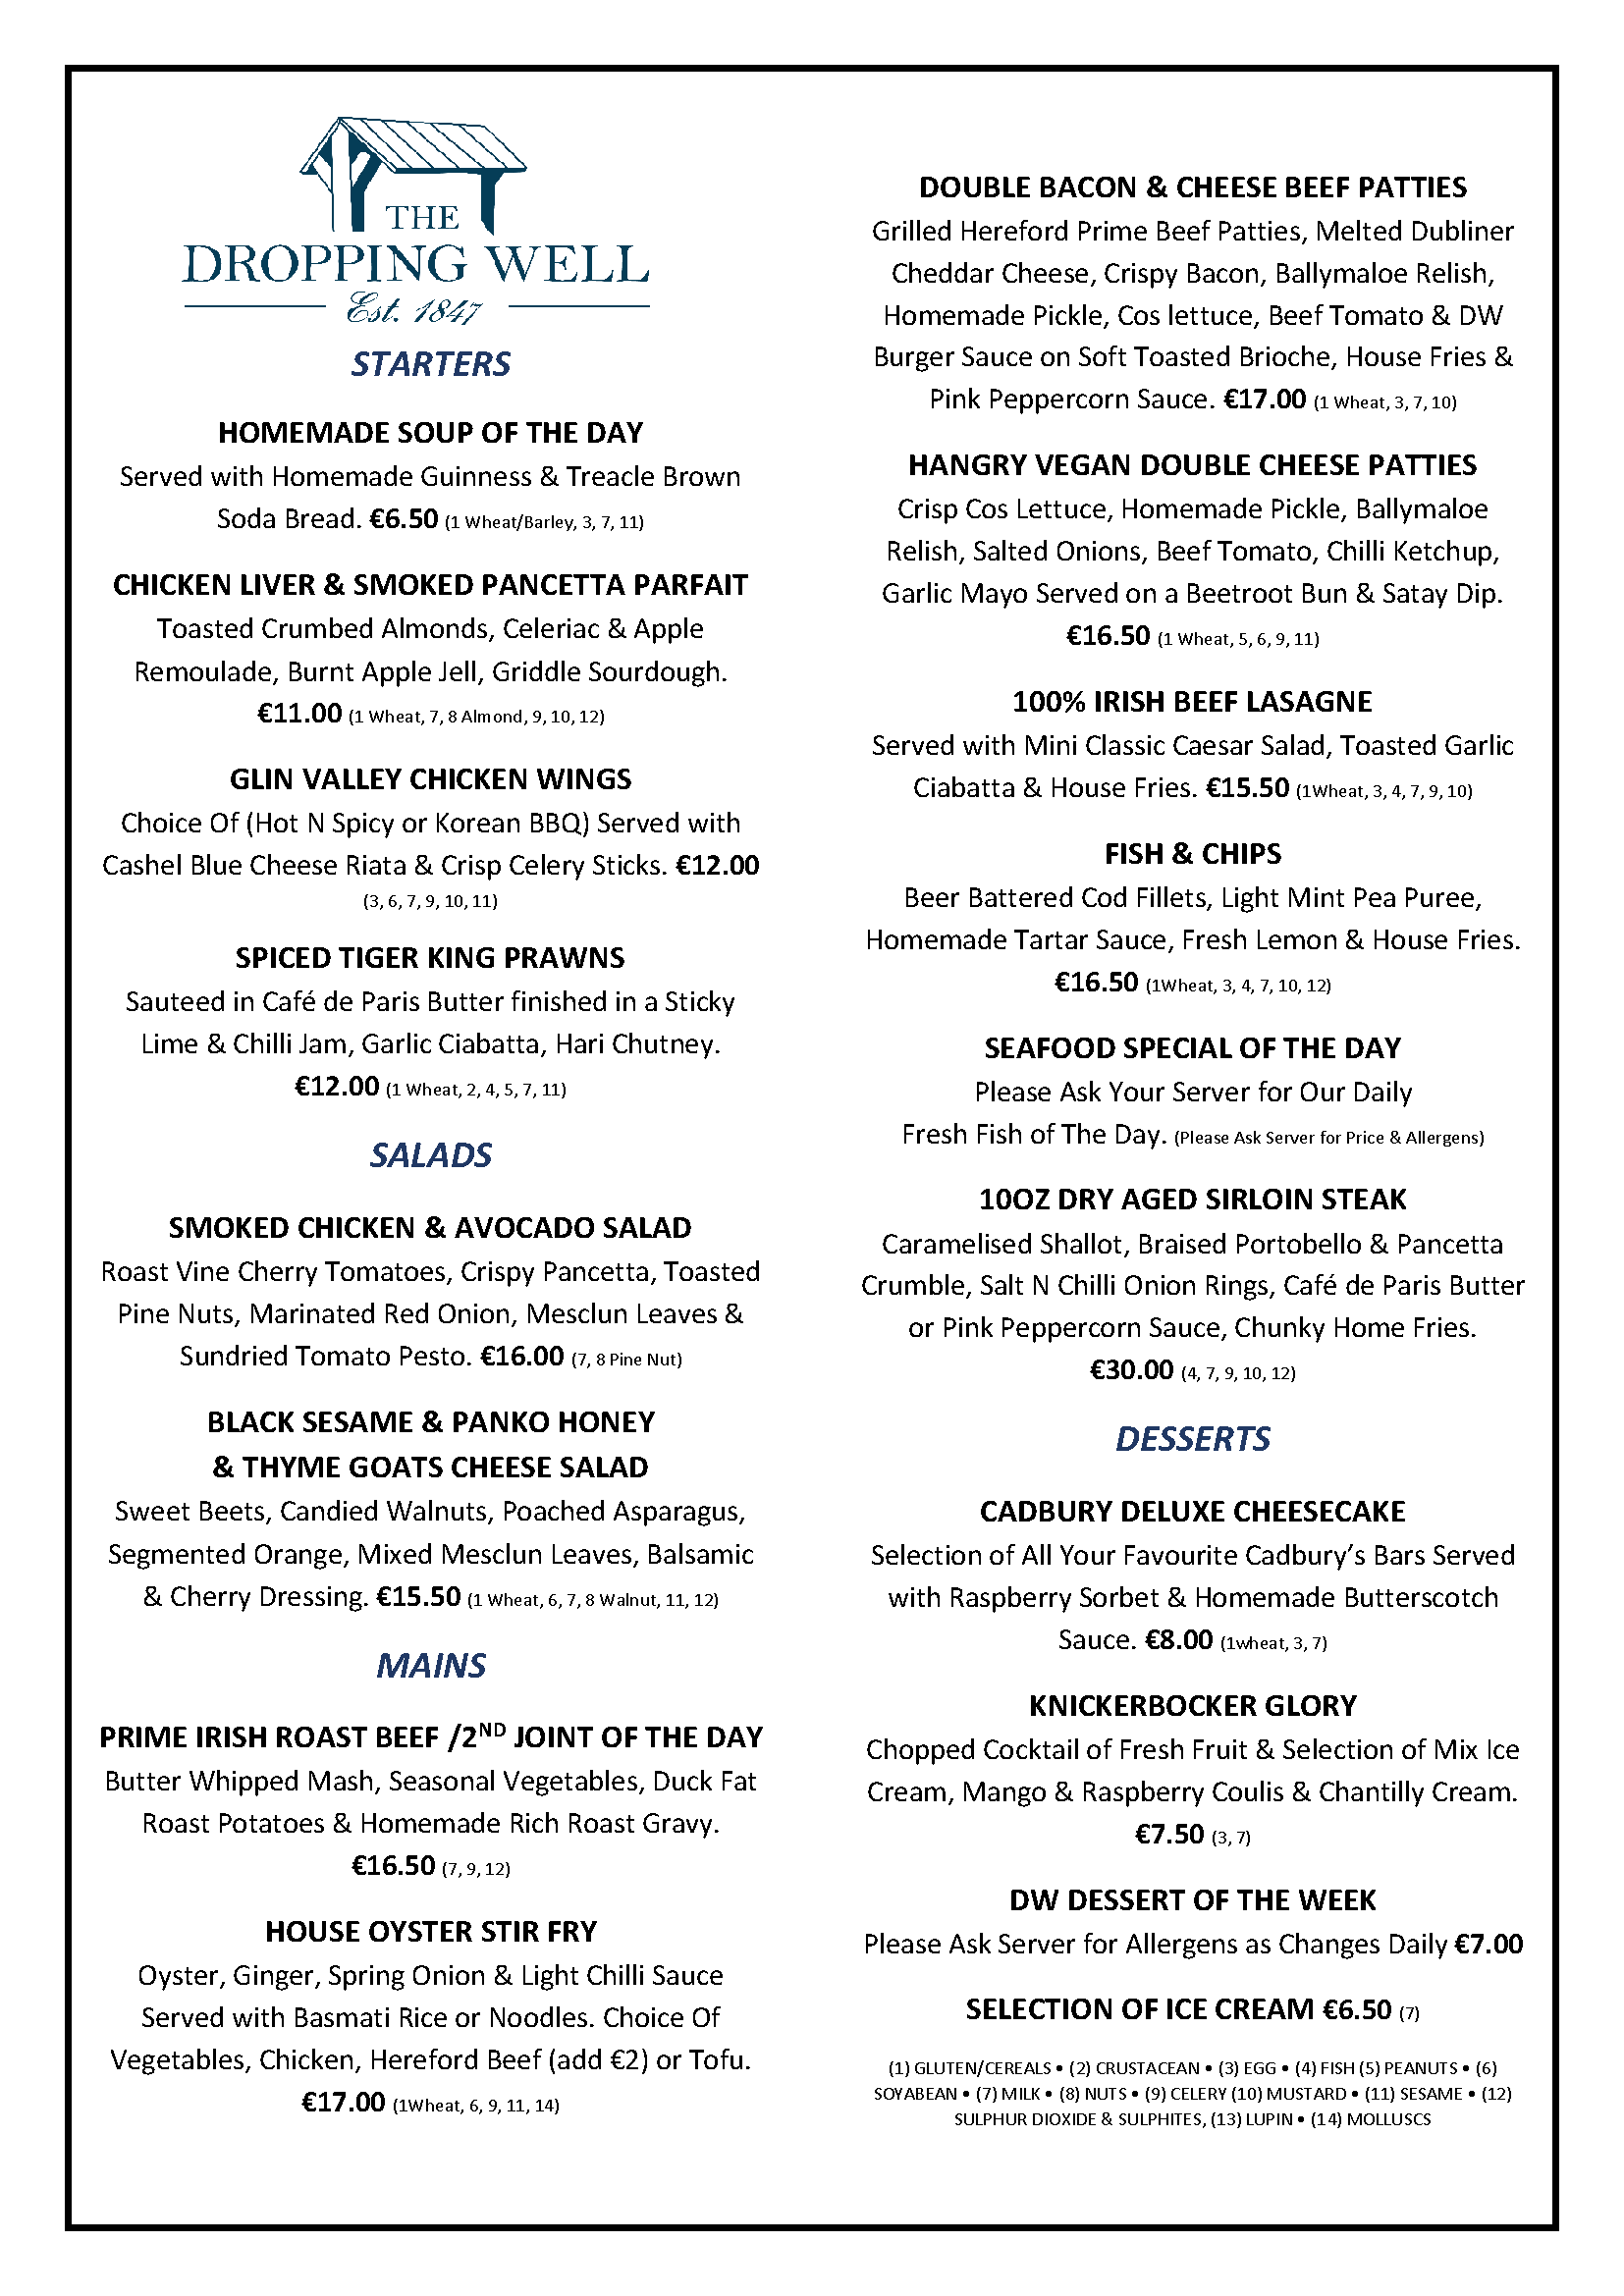 Dropping Well Sunday Lunch Menu (1)